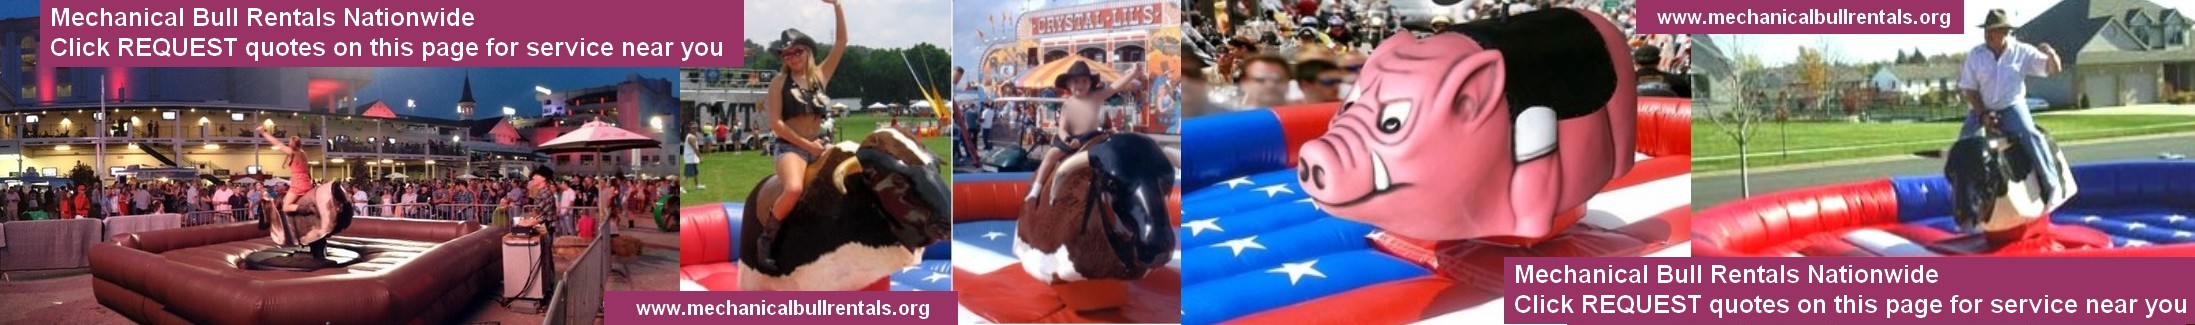 Mechanical Bull Rentals St. Louis Missouri MO and near you. Free referrals to local mechanical bull companies LOGO